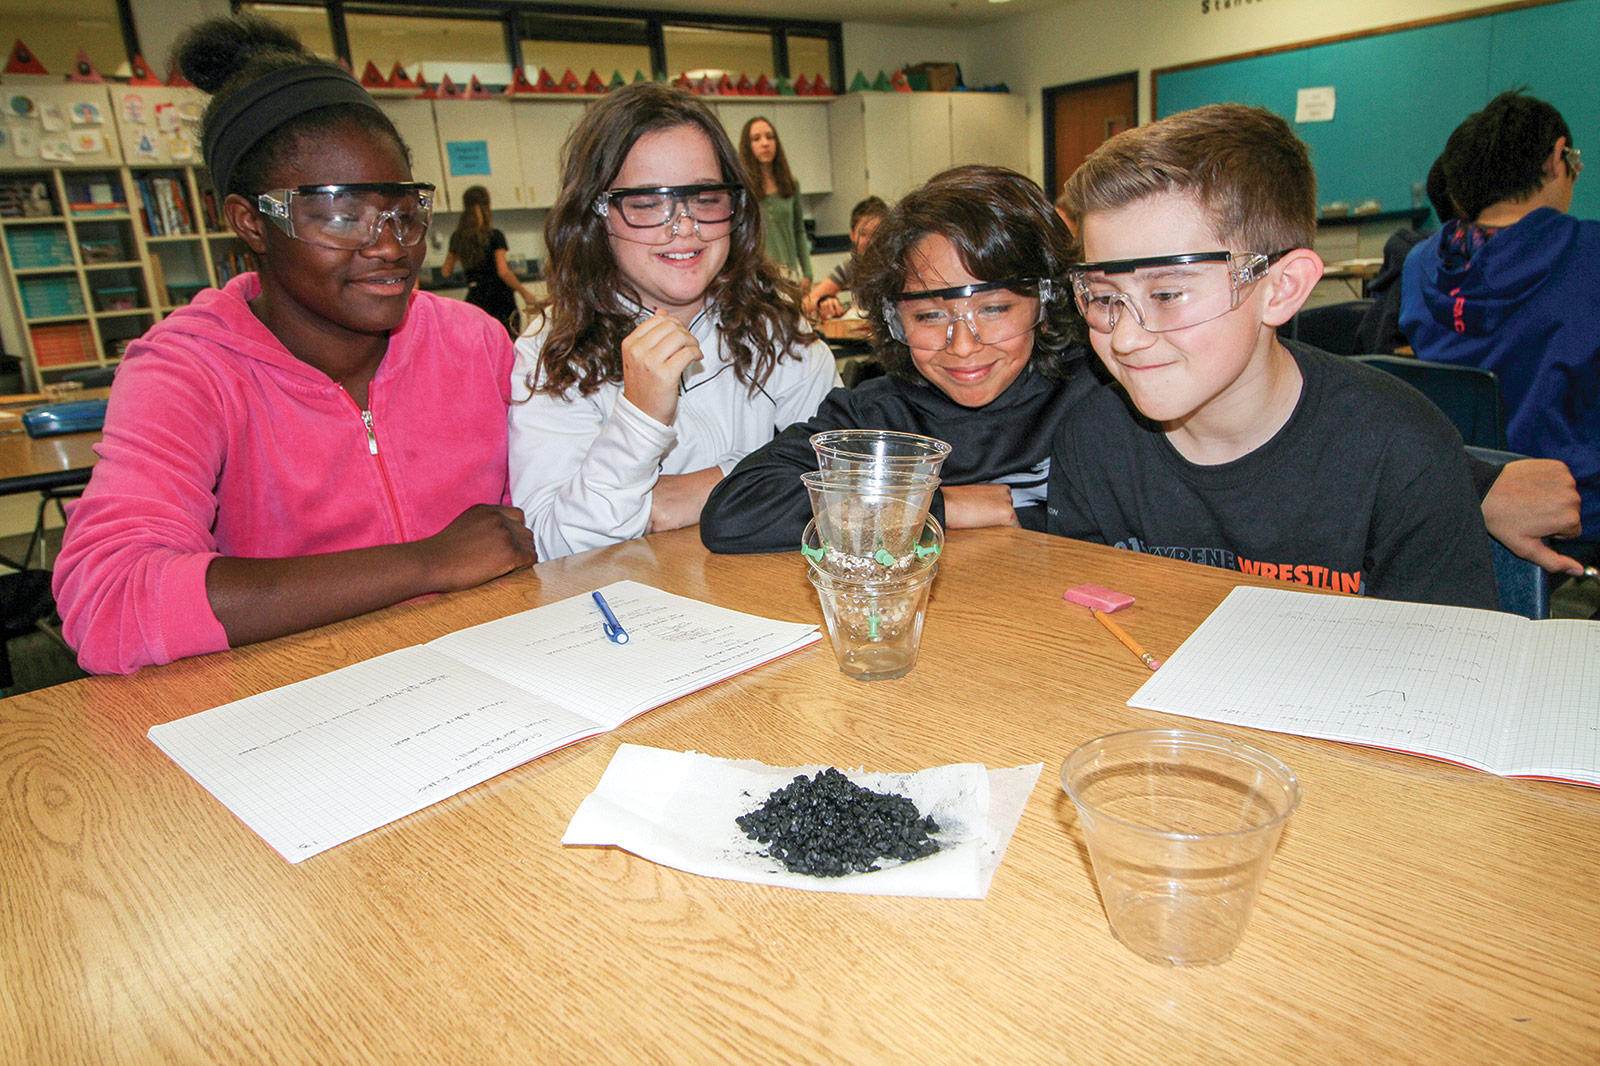 Students experimenting with filtering water